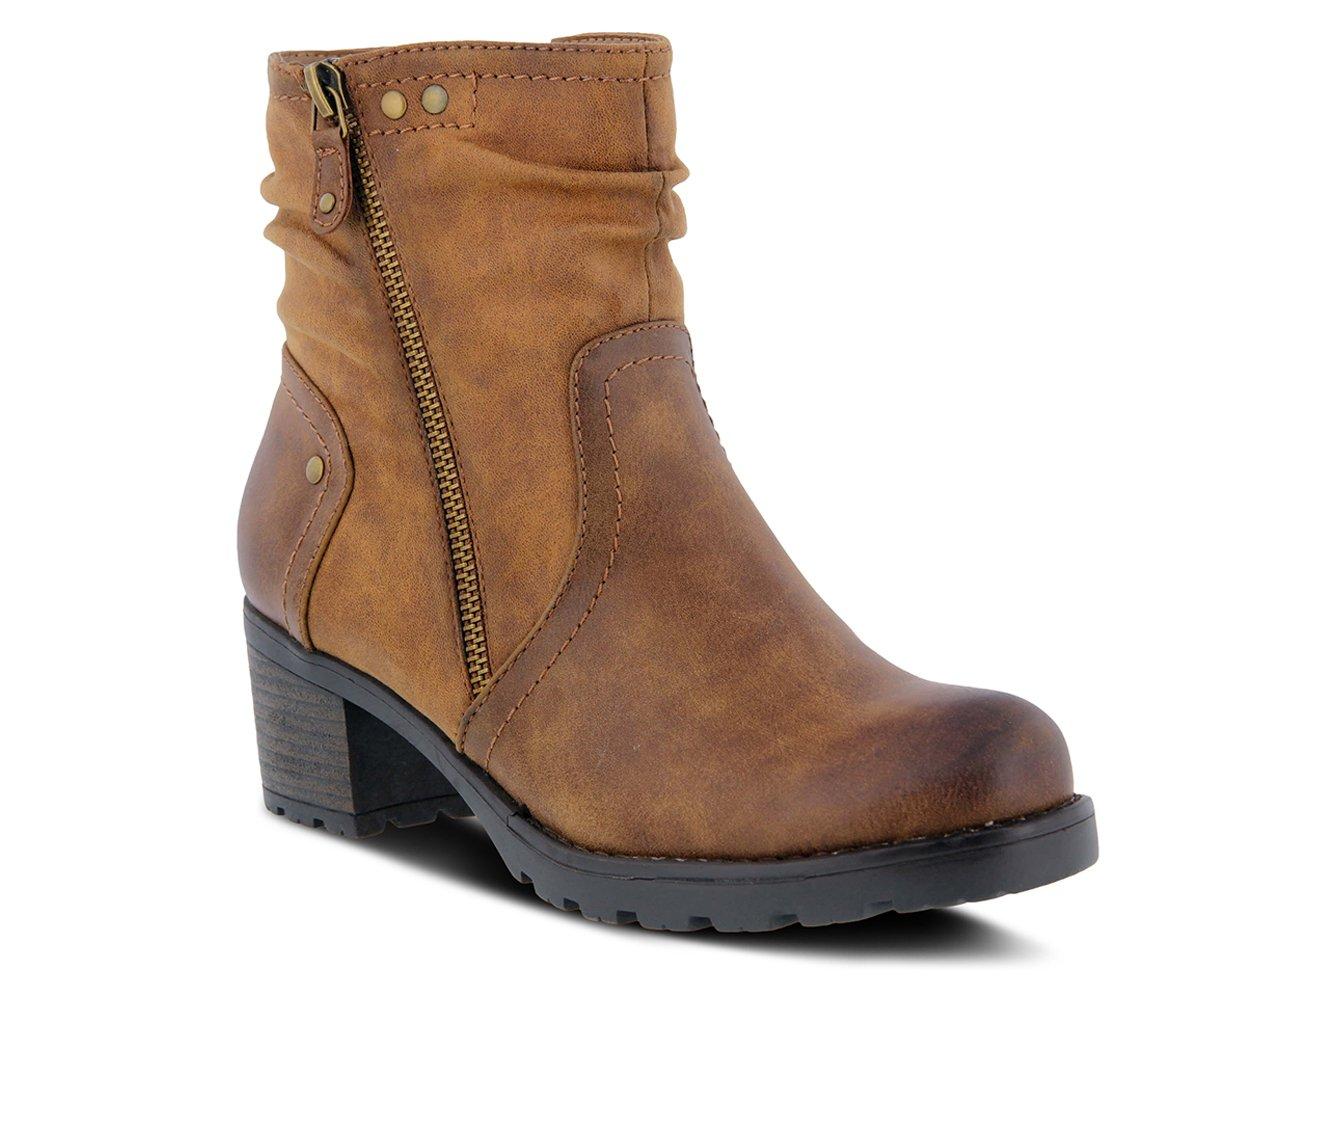 Women's Patrizia Blanch Ruched Boots